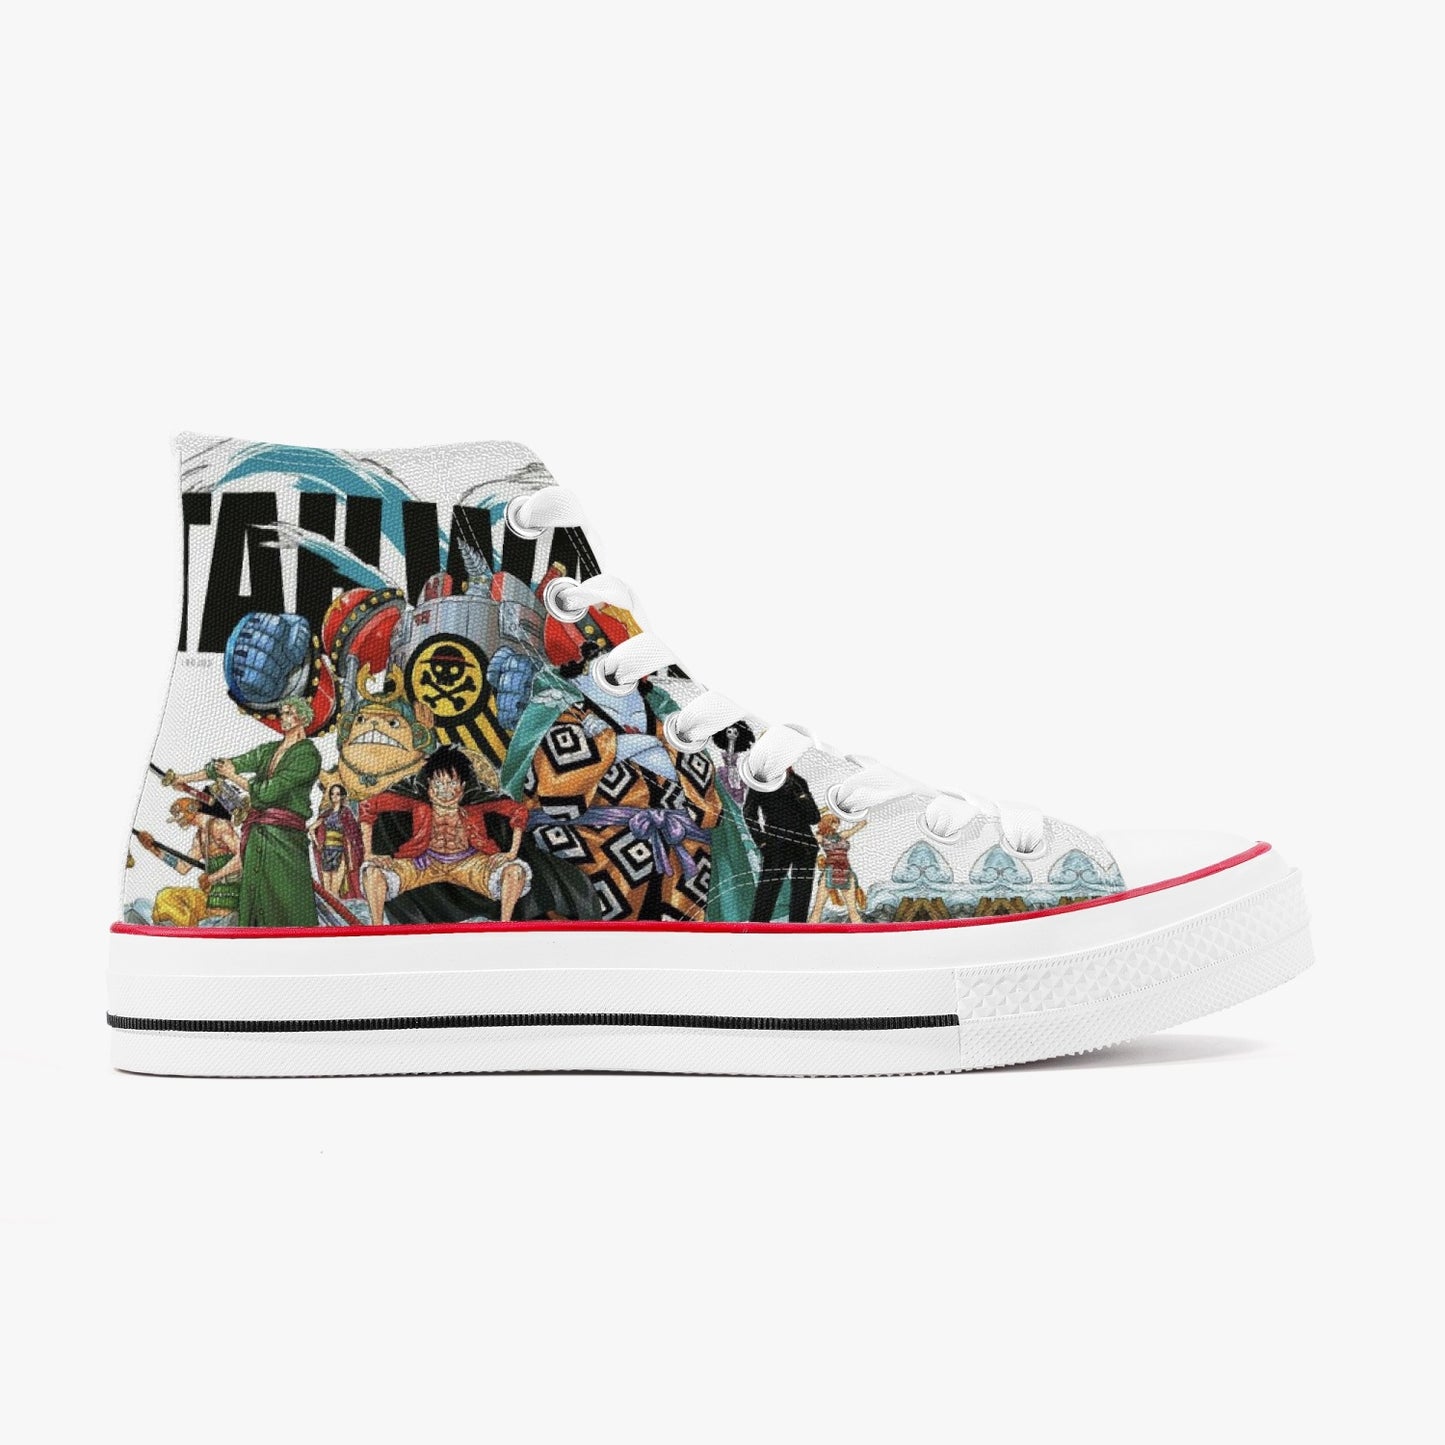 STRAWHATS CREW High-Top Canvas Shoes - White